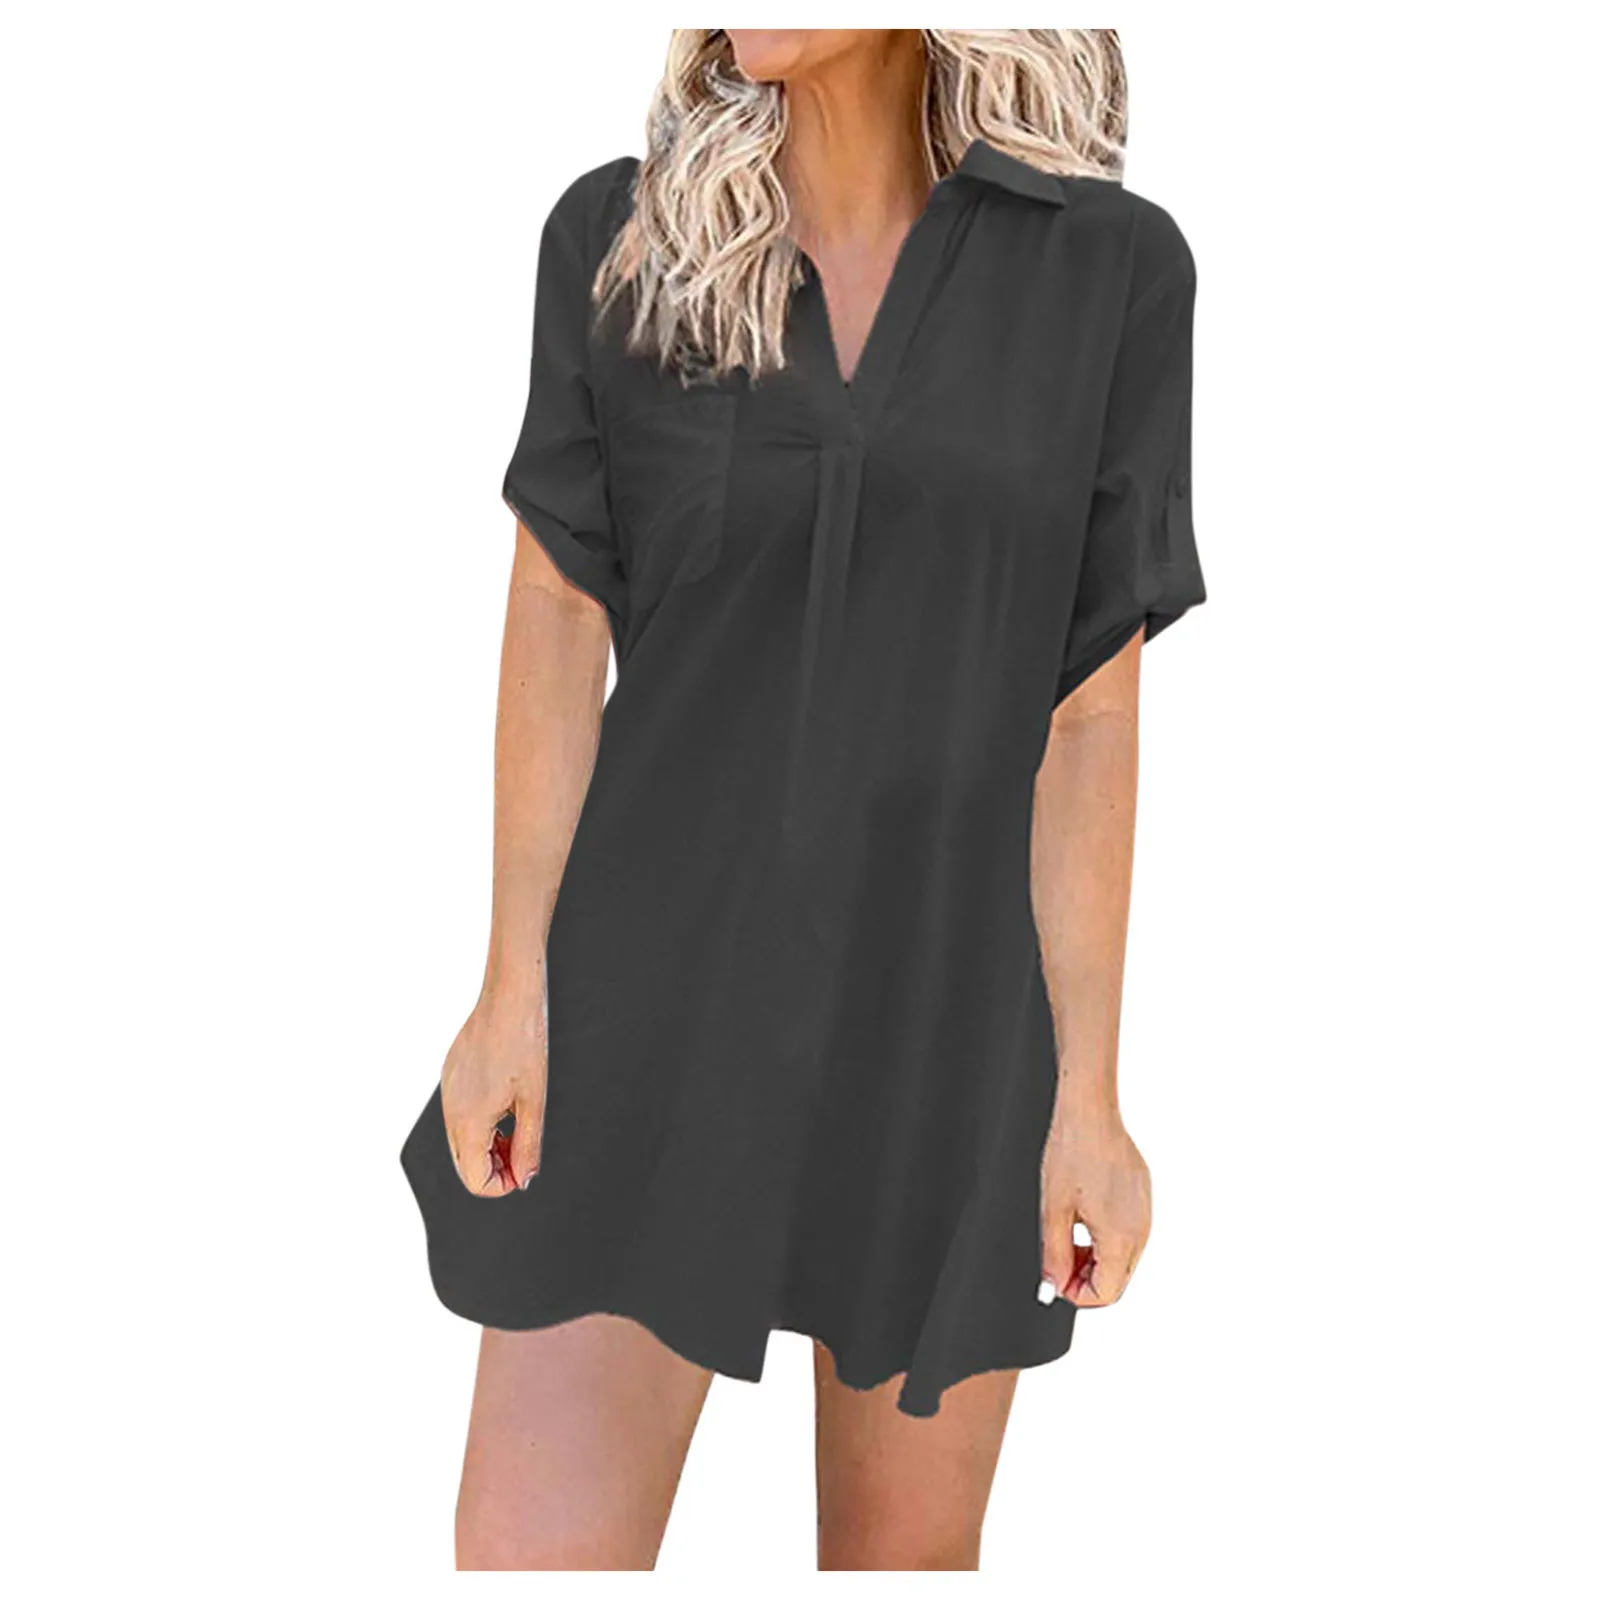 Women's Bikini Cover-up Sexy Swimsuit Cover Ups Summer Bathing Suit Beach Coverups Beach Casual Dress Tops Купальник Женский bathing suit wrap cover up